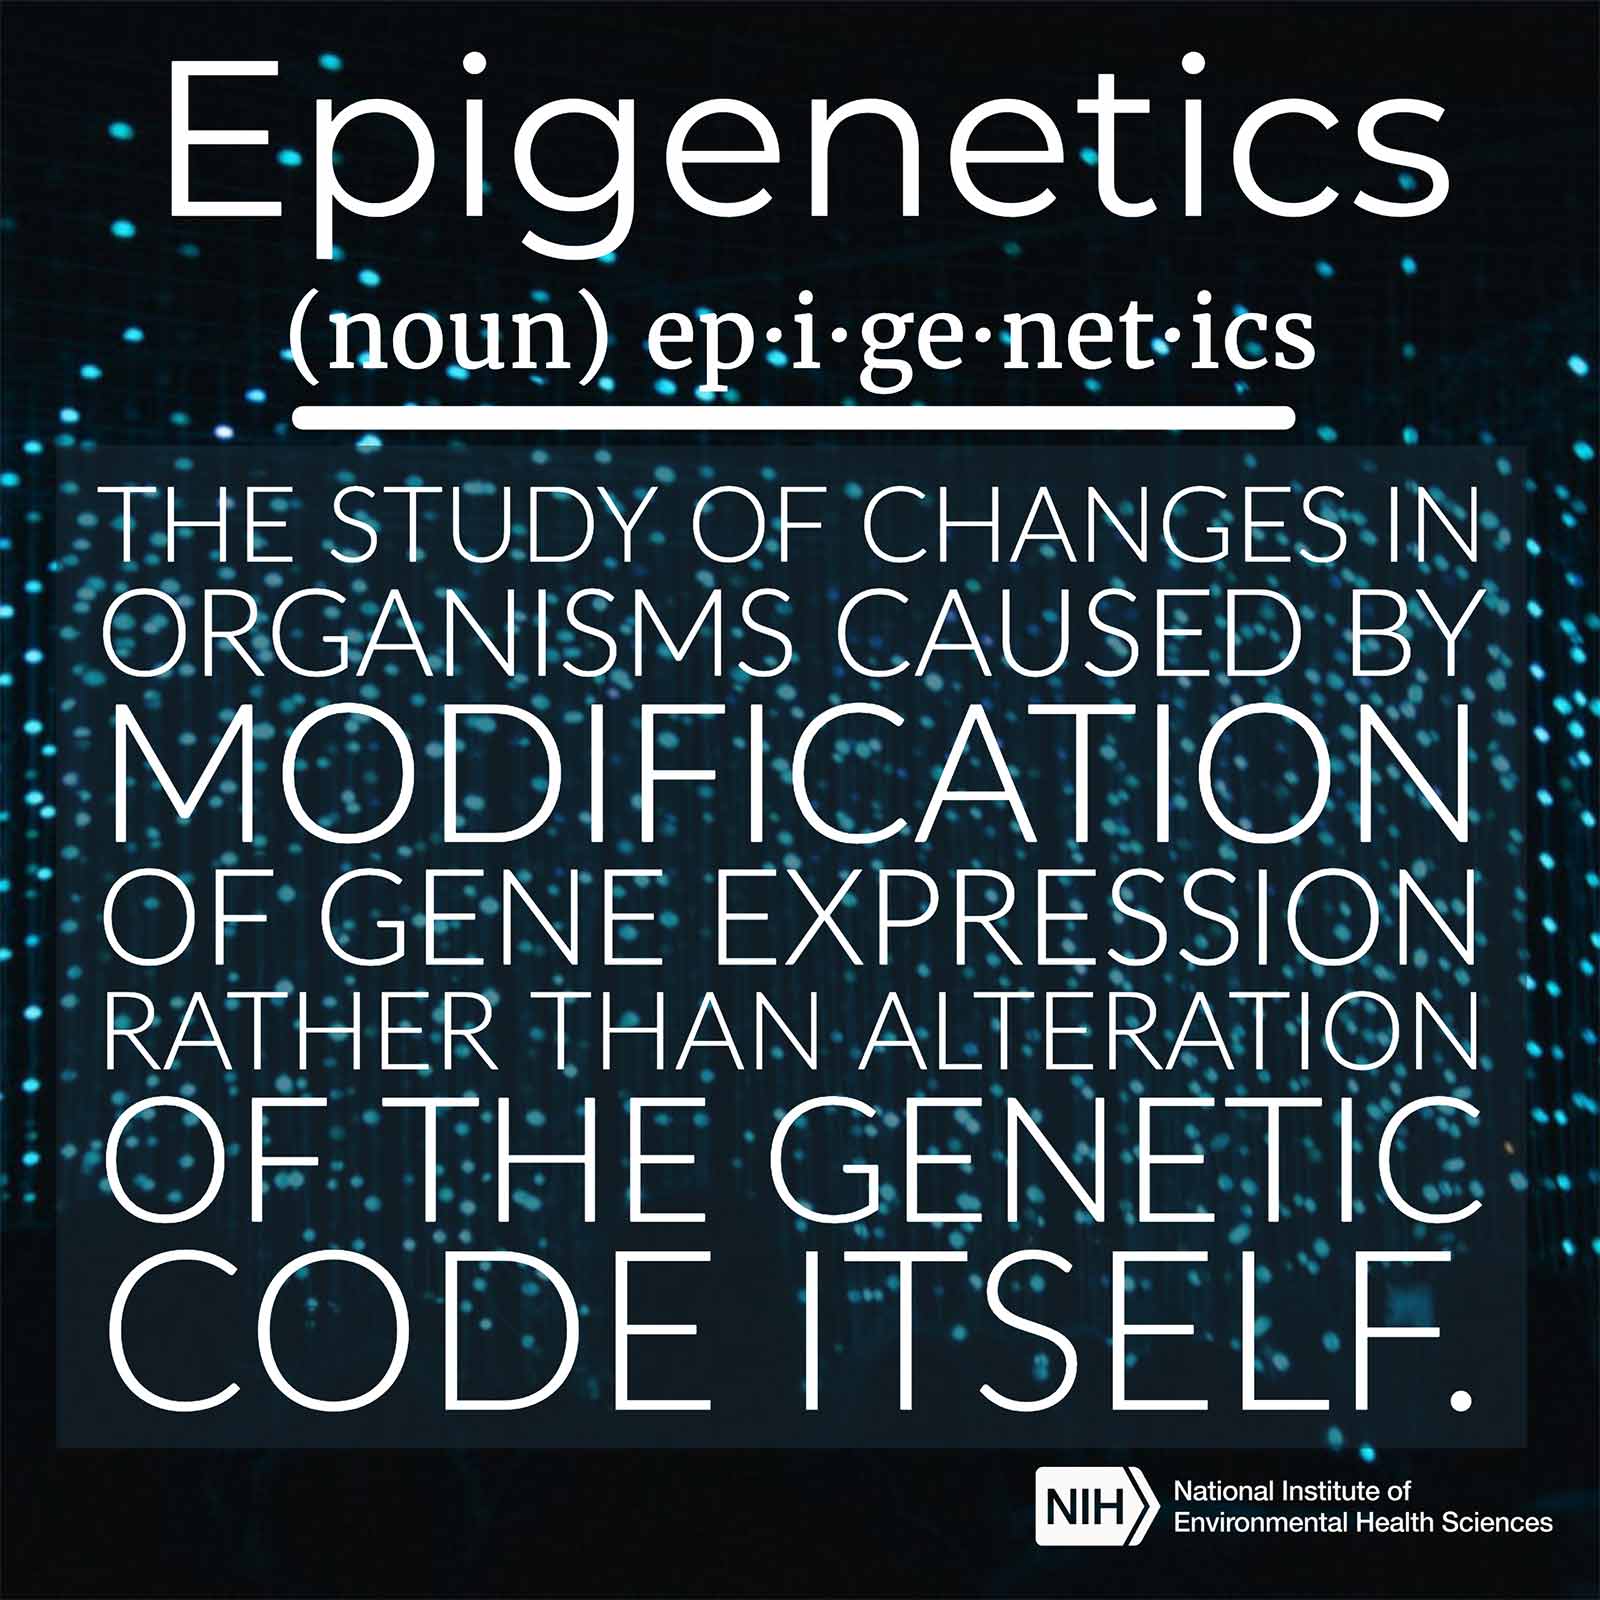 Epigenetics (noun) defined as 'The study of changes in organisms caused by modification of gene expression rather than alteration of the genetic code itself.'